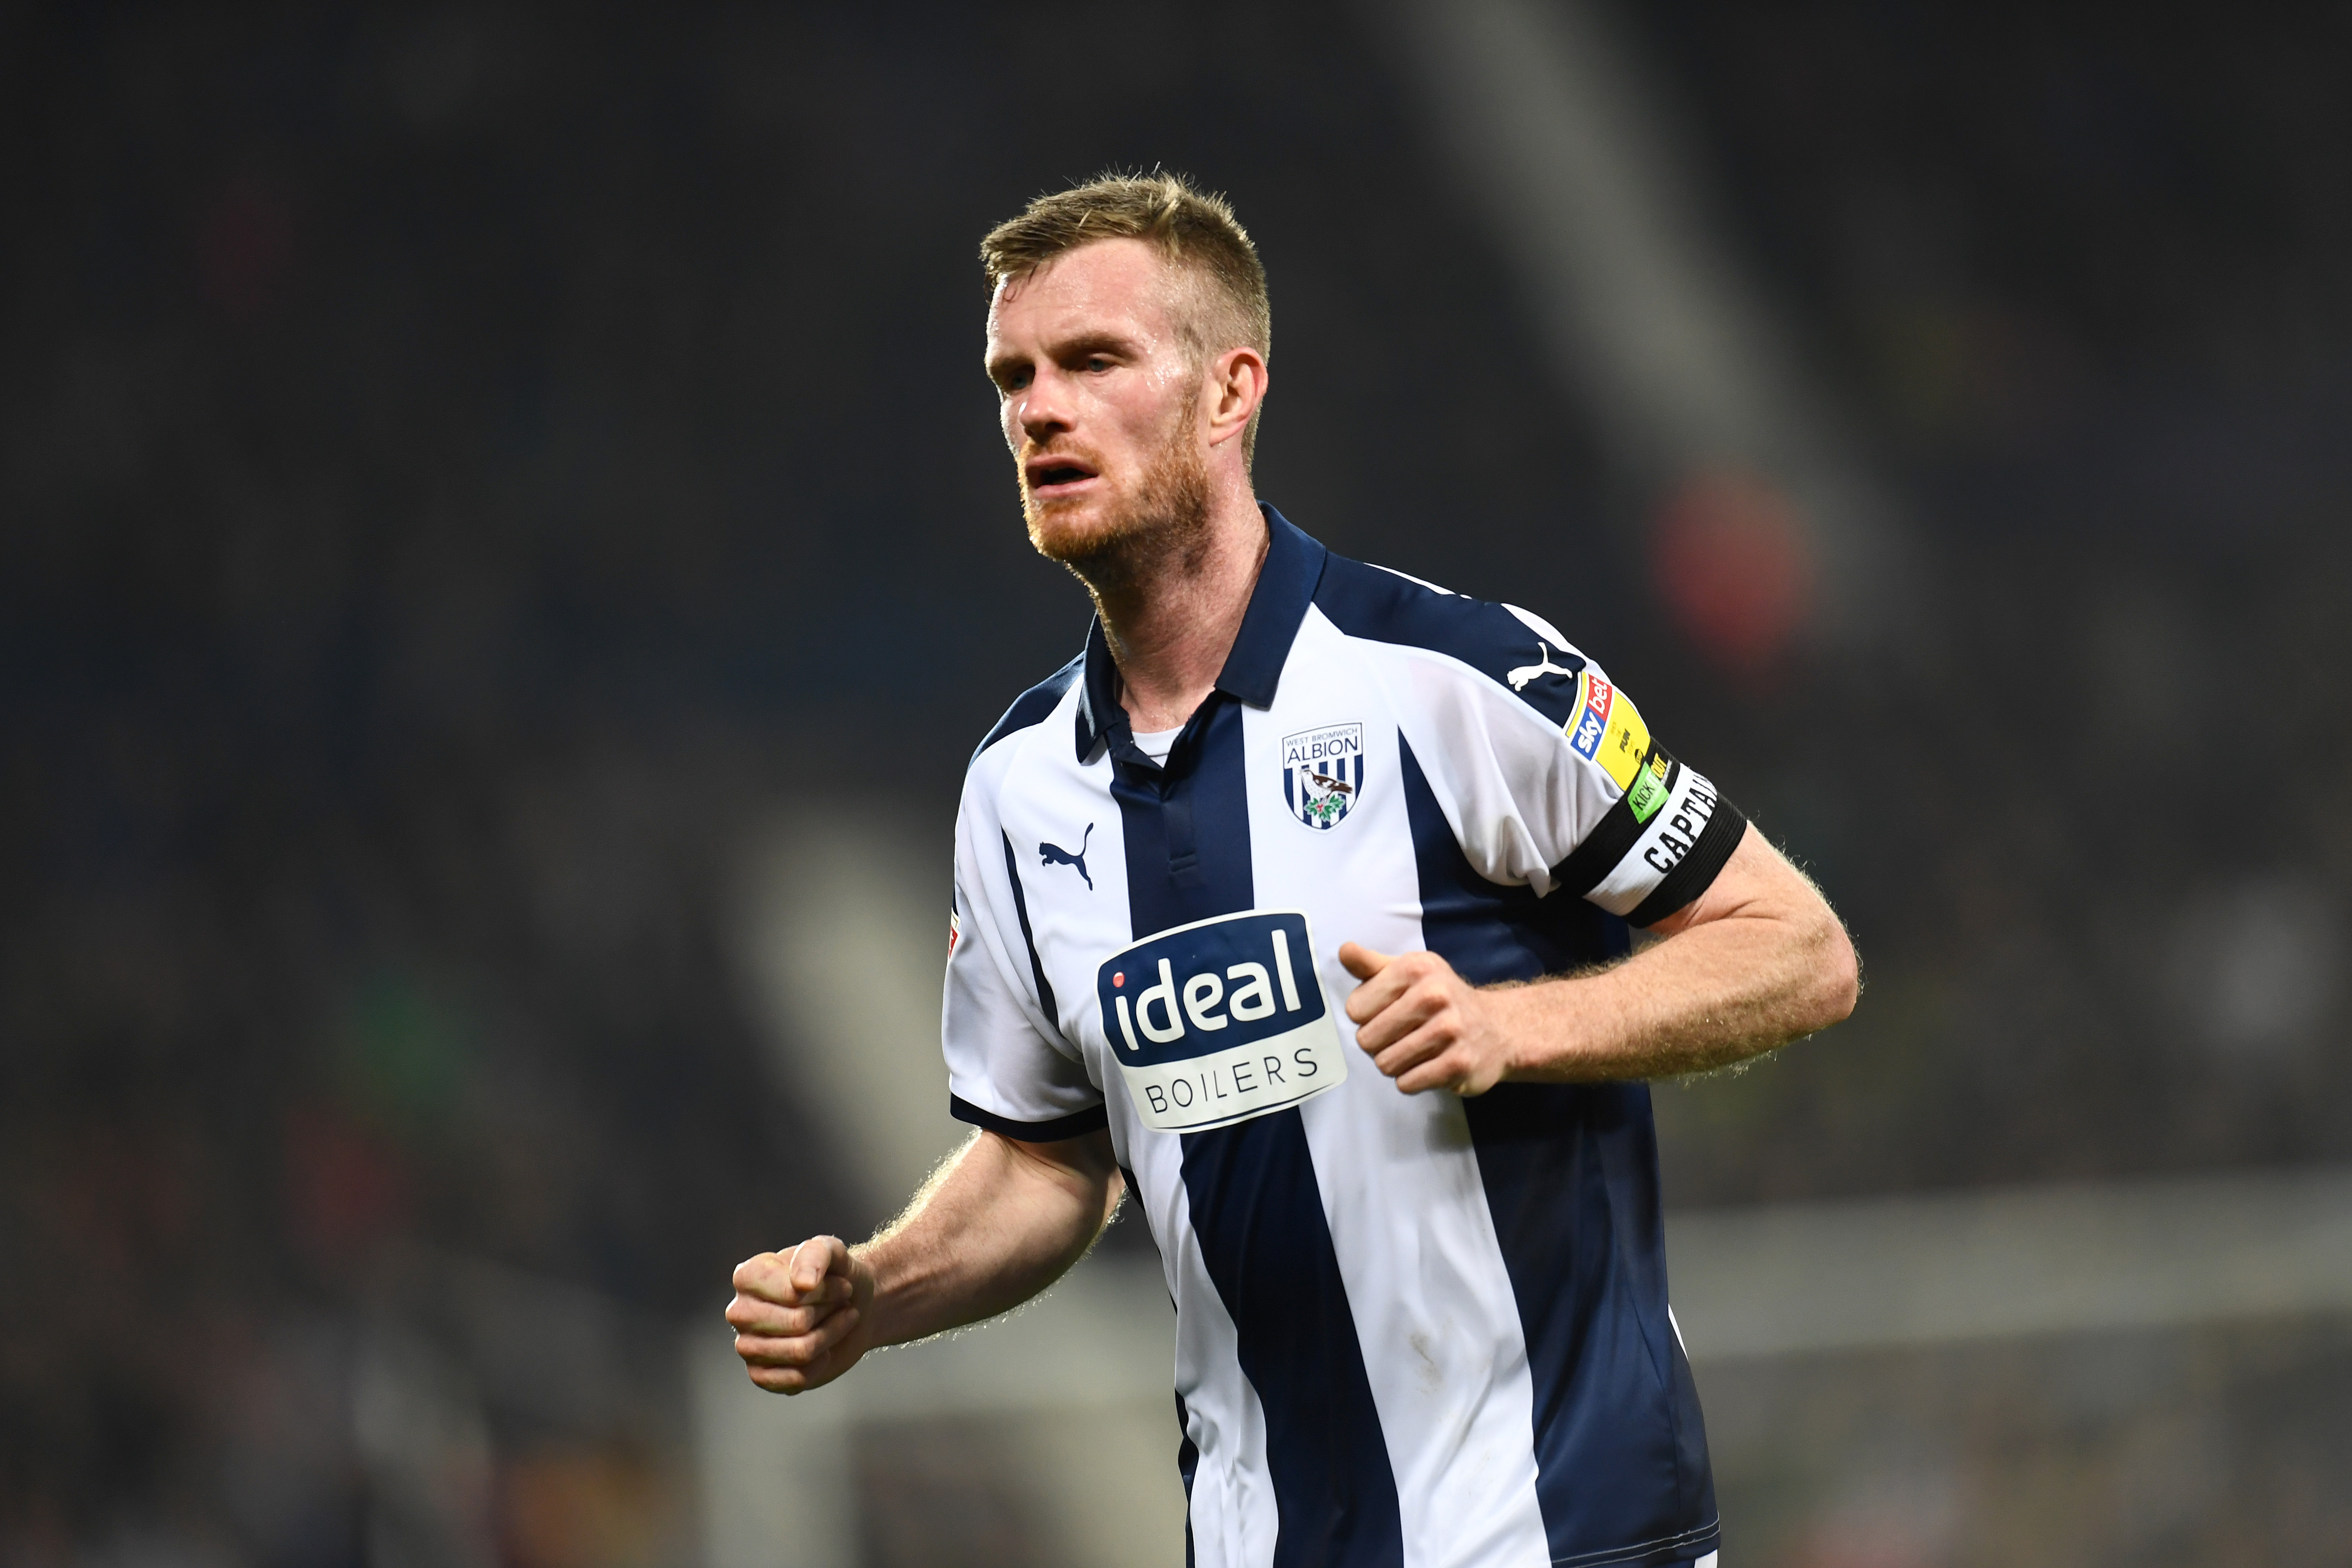 Chris Brunt in action for Albion during the 2018/19 campaign wearing the home shirt